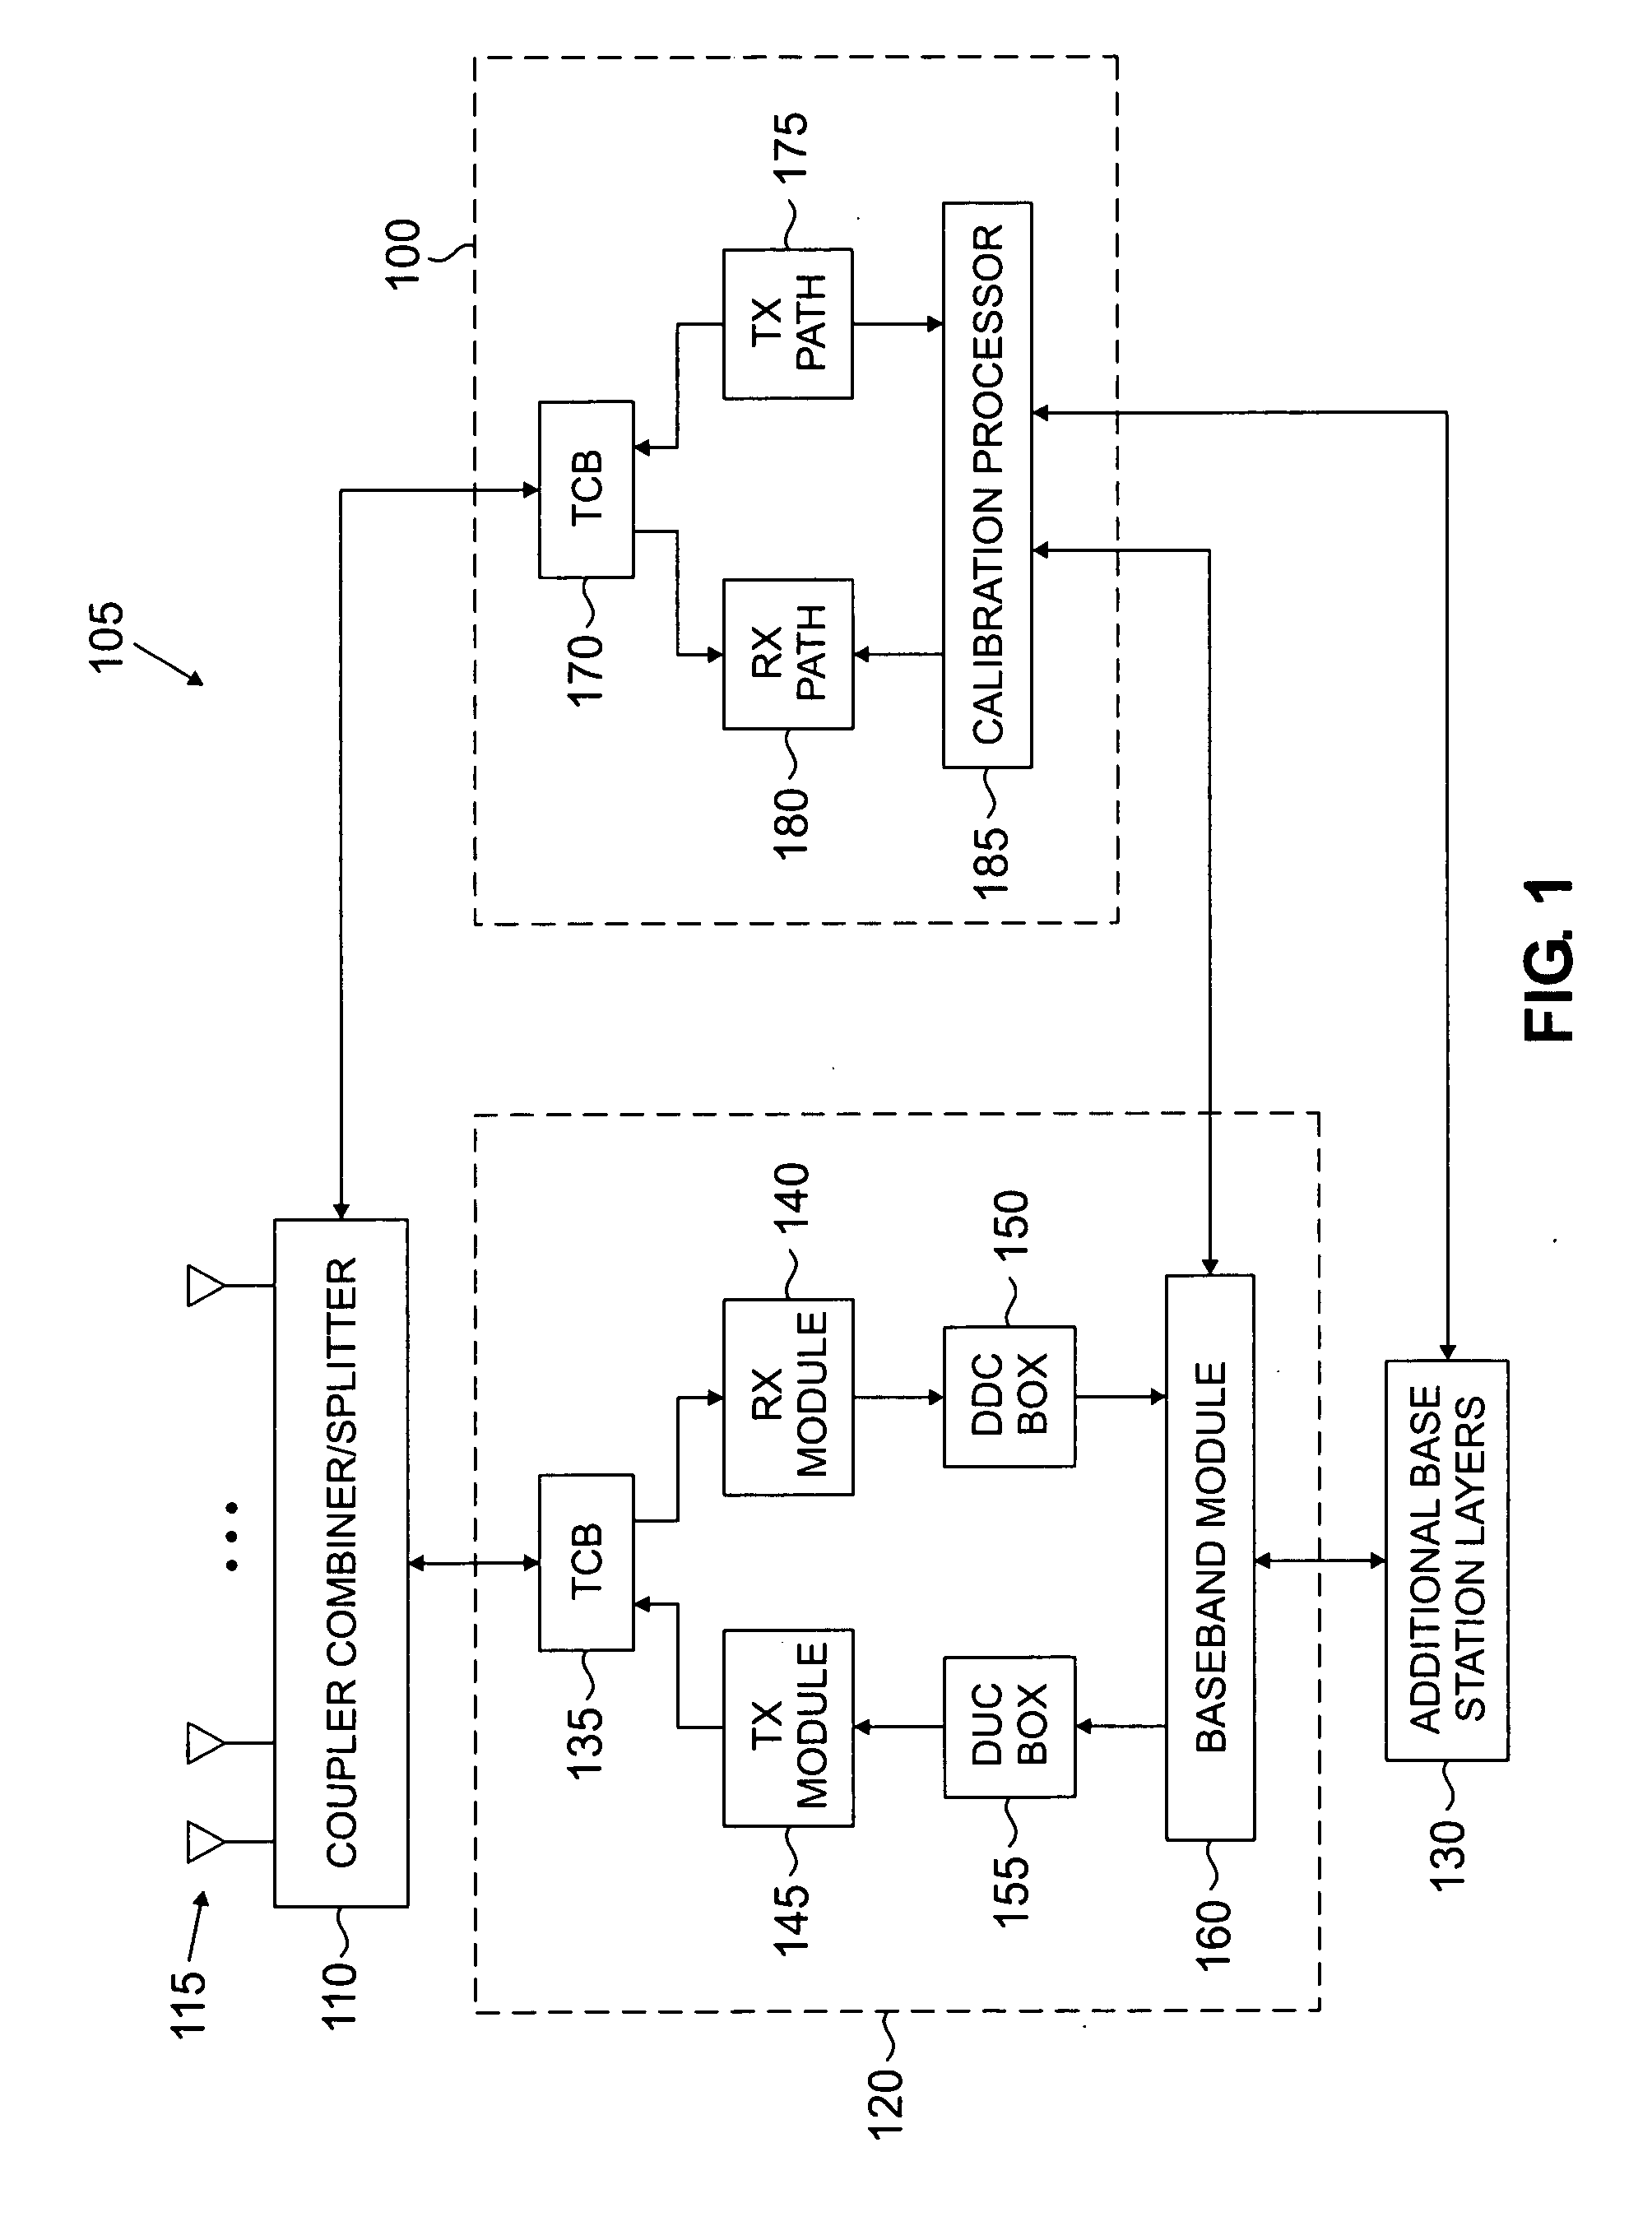 Method and system for calibrating multiple types of base stations in a wireless network